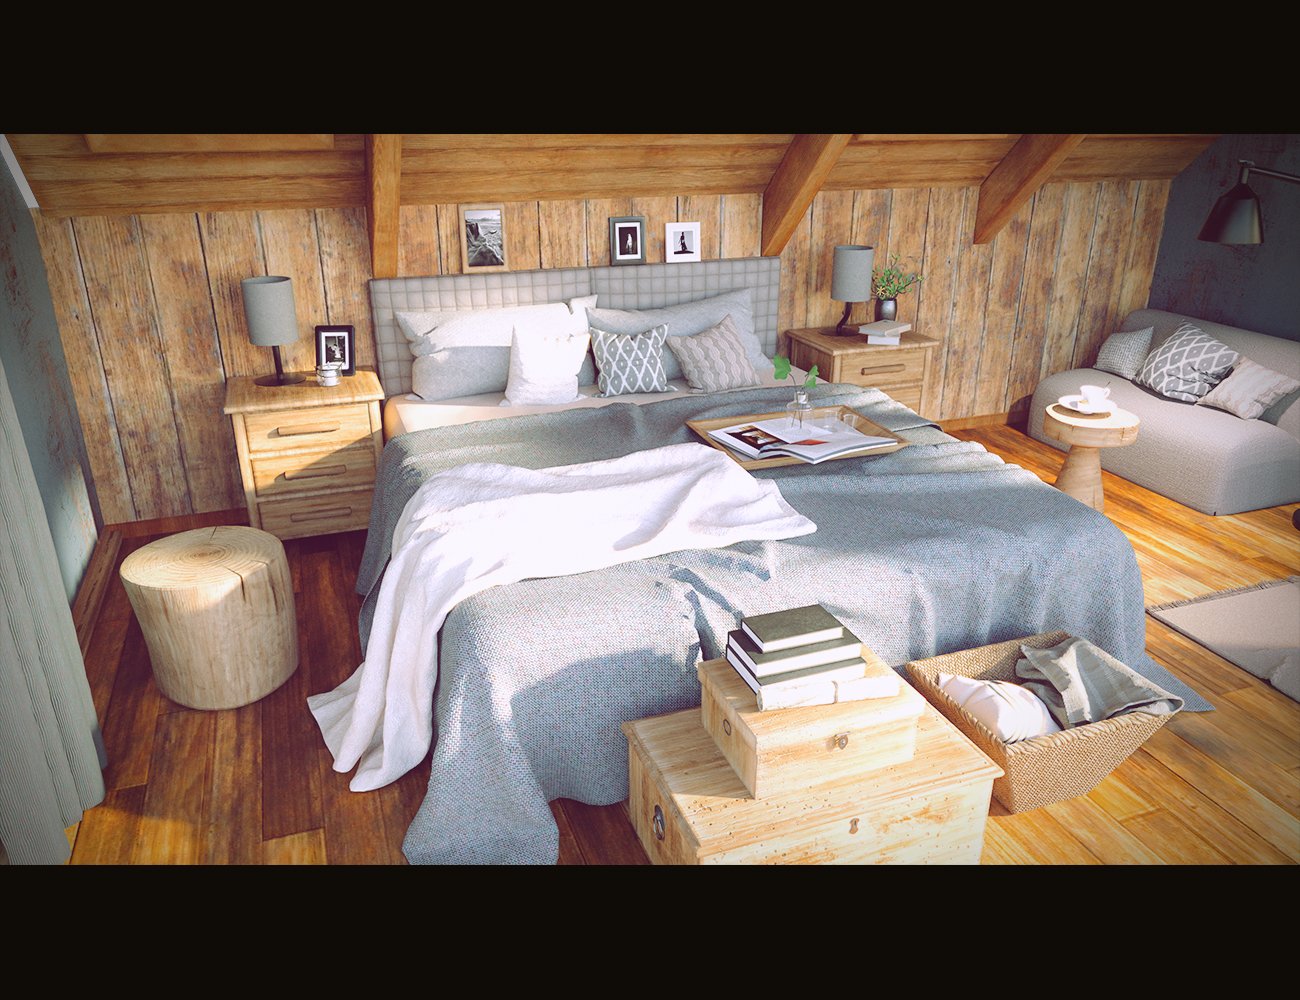 Winter Vacation Bedroom by: Polish, 3D Models by Daz 3D